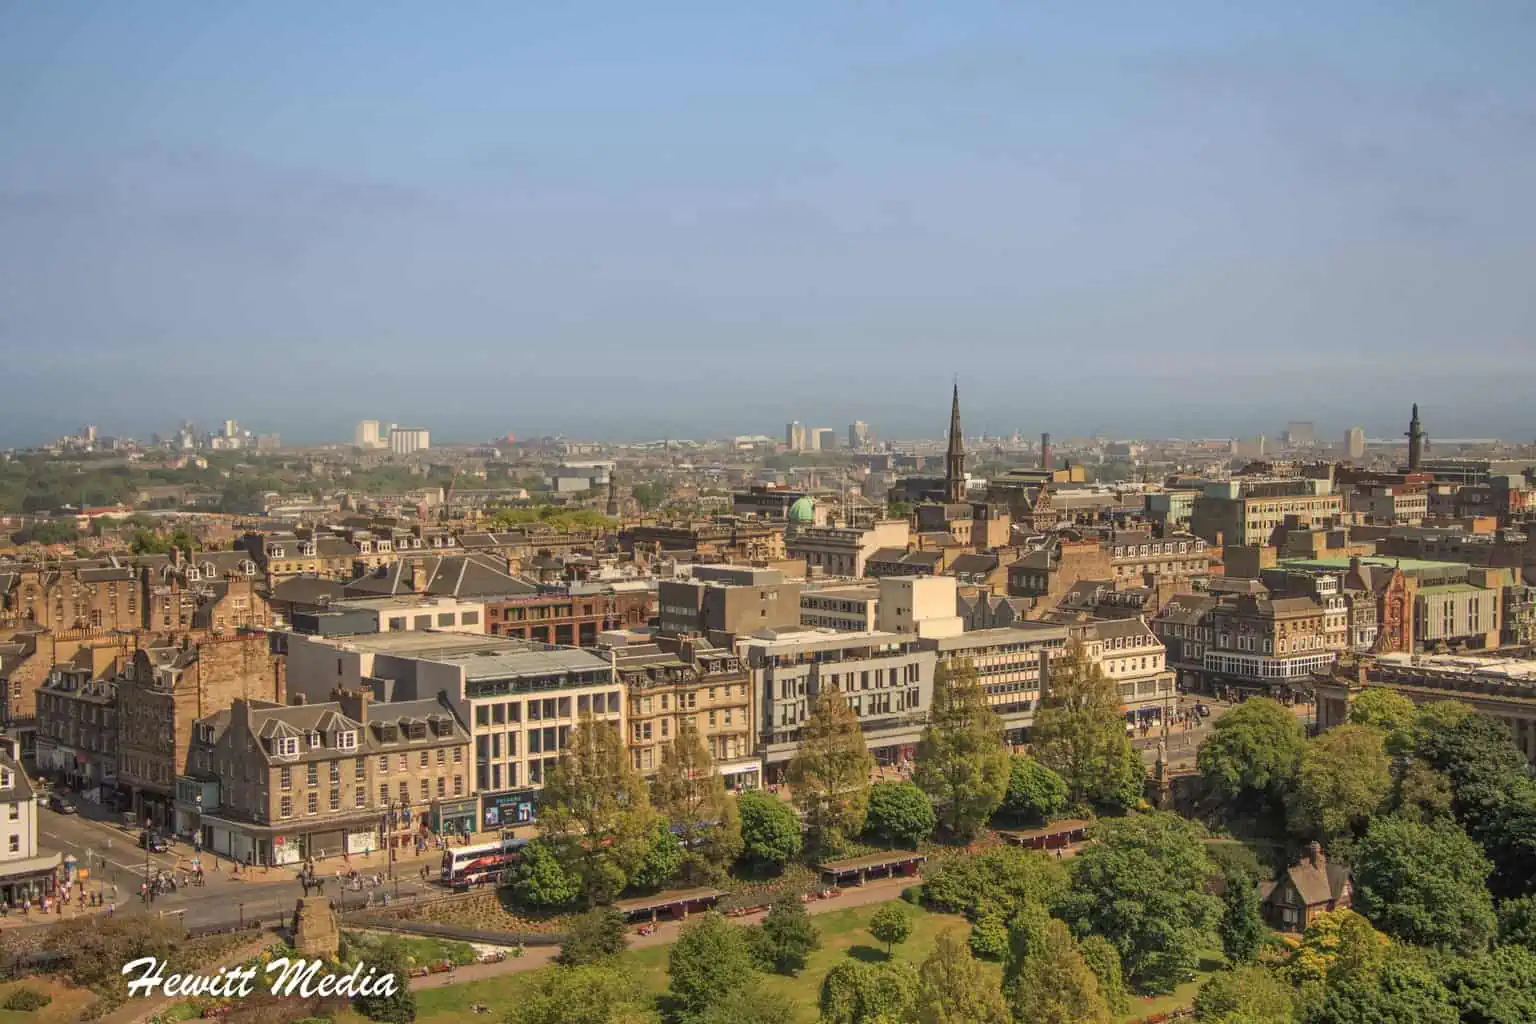 The All You Need Traveler’s Guide to Edinburgh